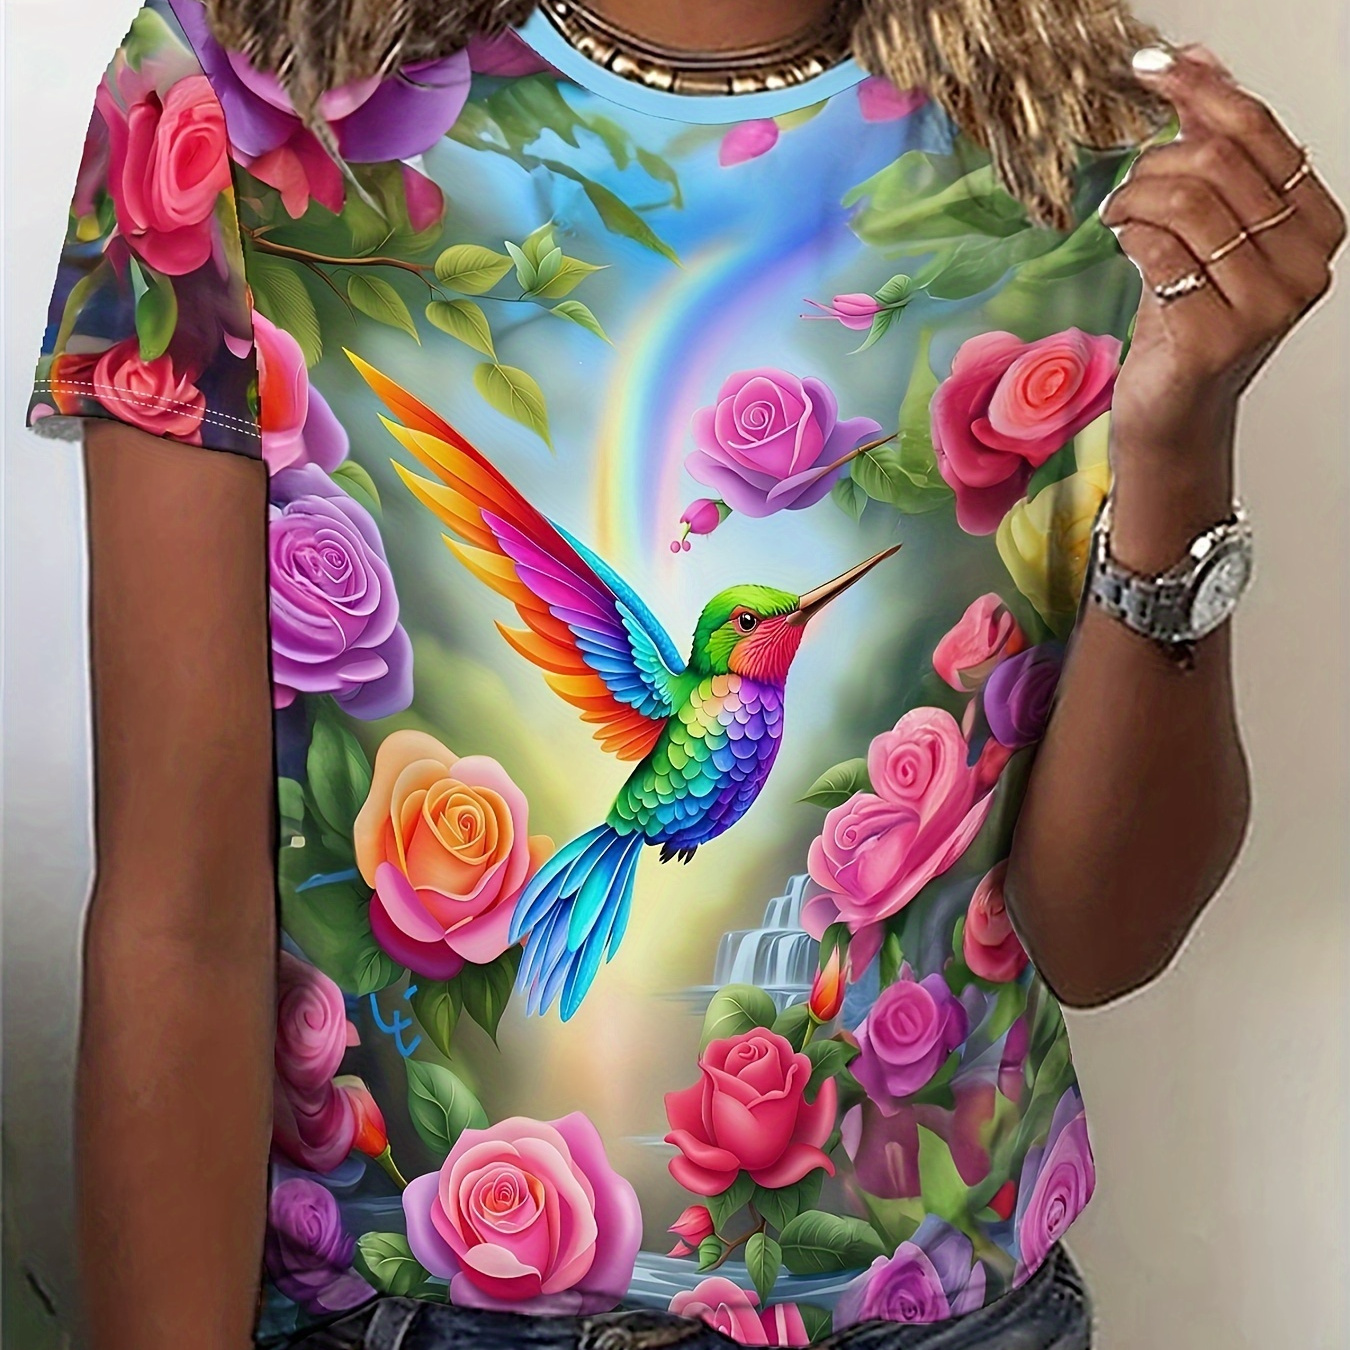 

Bird & Floral Print T-shirt, Casual Crew Neck Short Sleeve Top For Spring & Summer, Women's Clothing